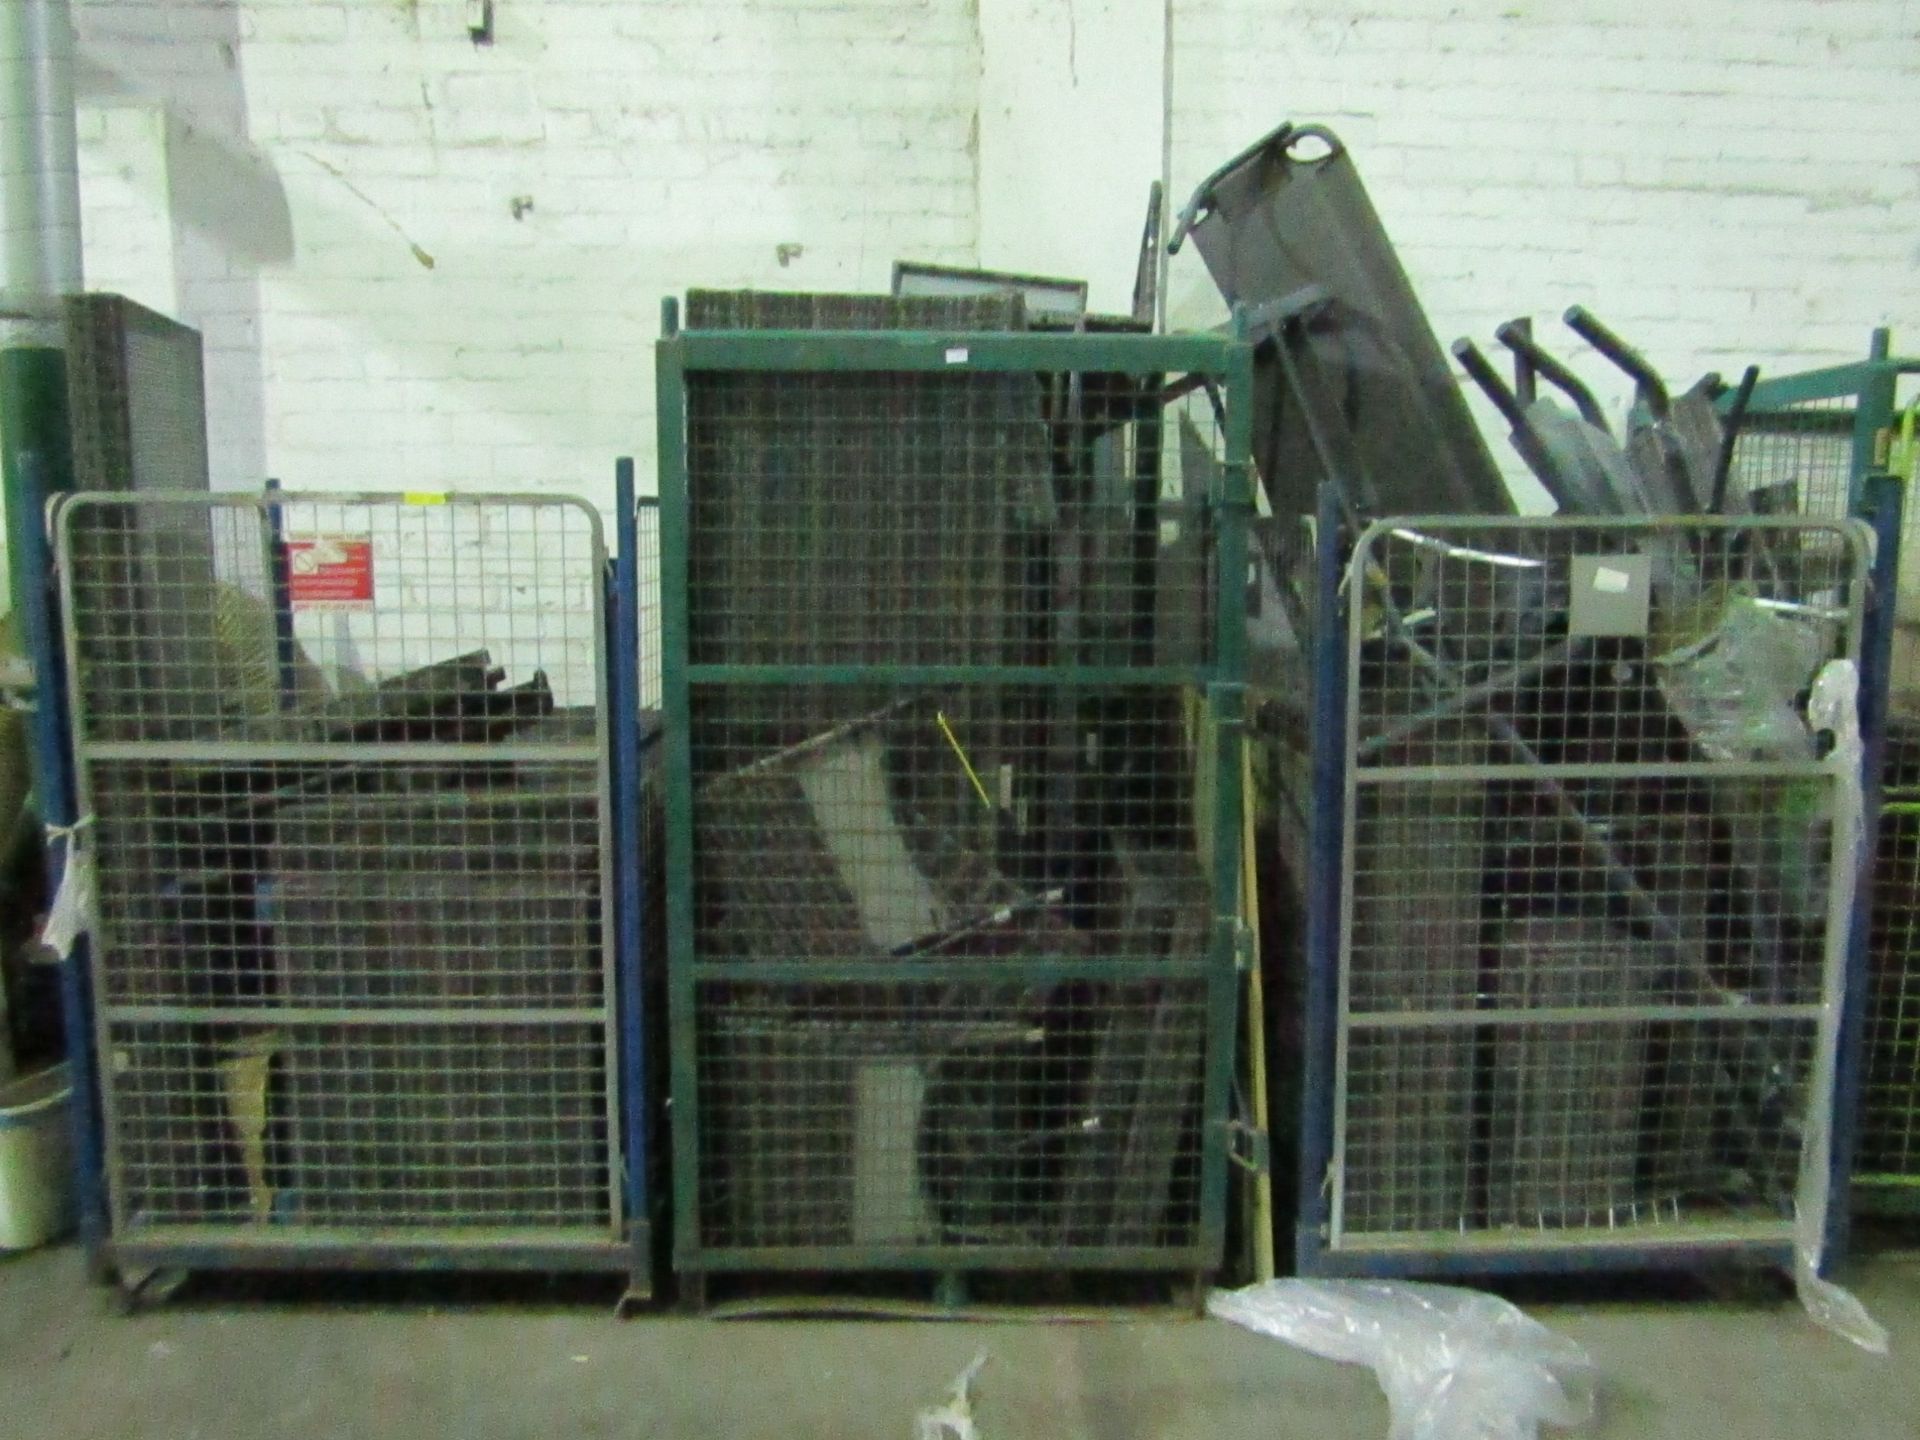 3x Full pallets worth of pieces for various rattan garden furnitures. All unchecked (please note